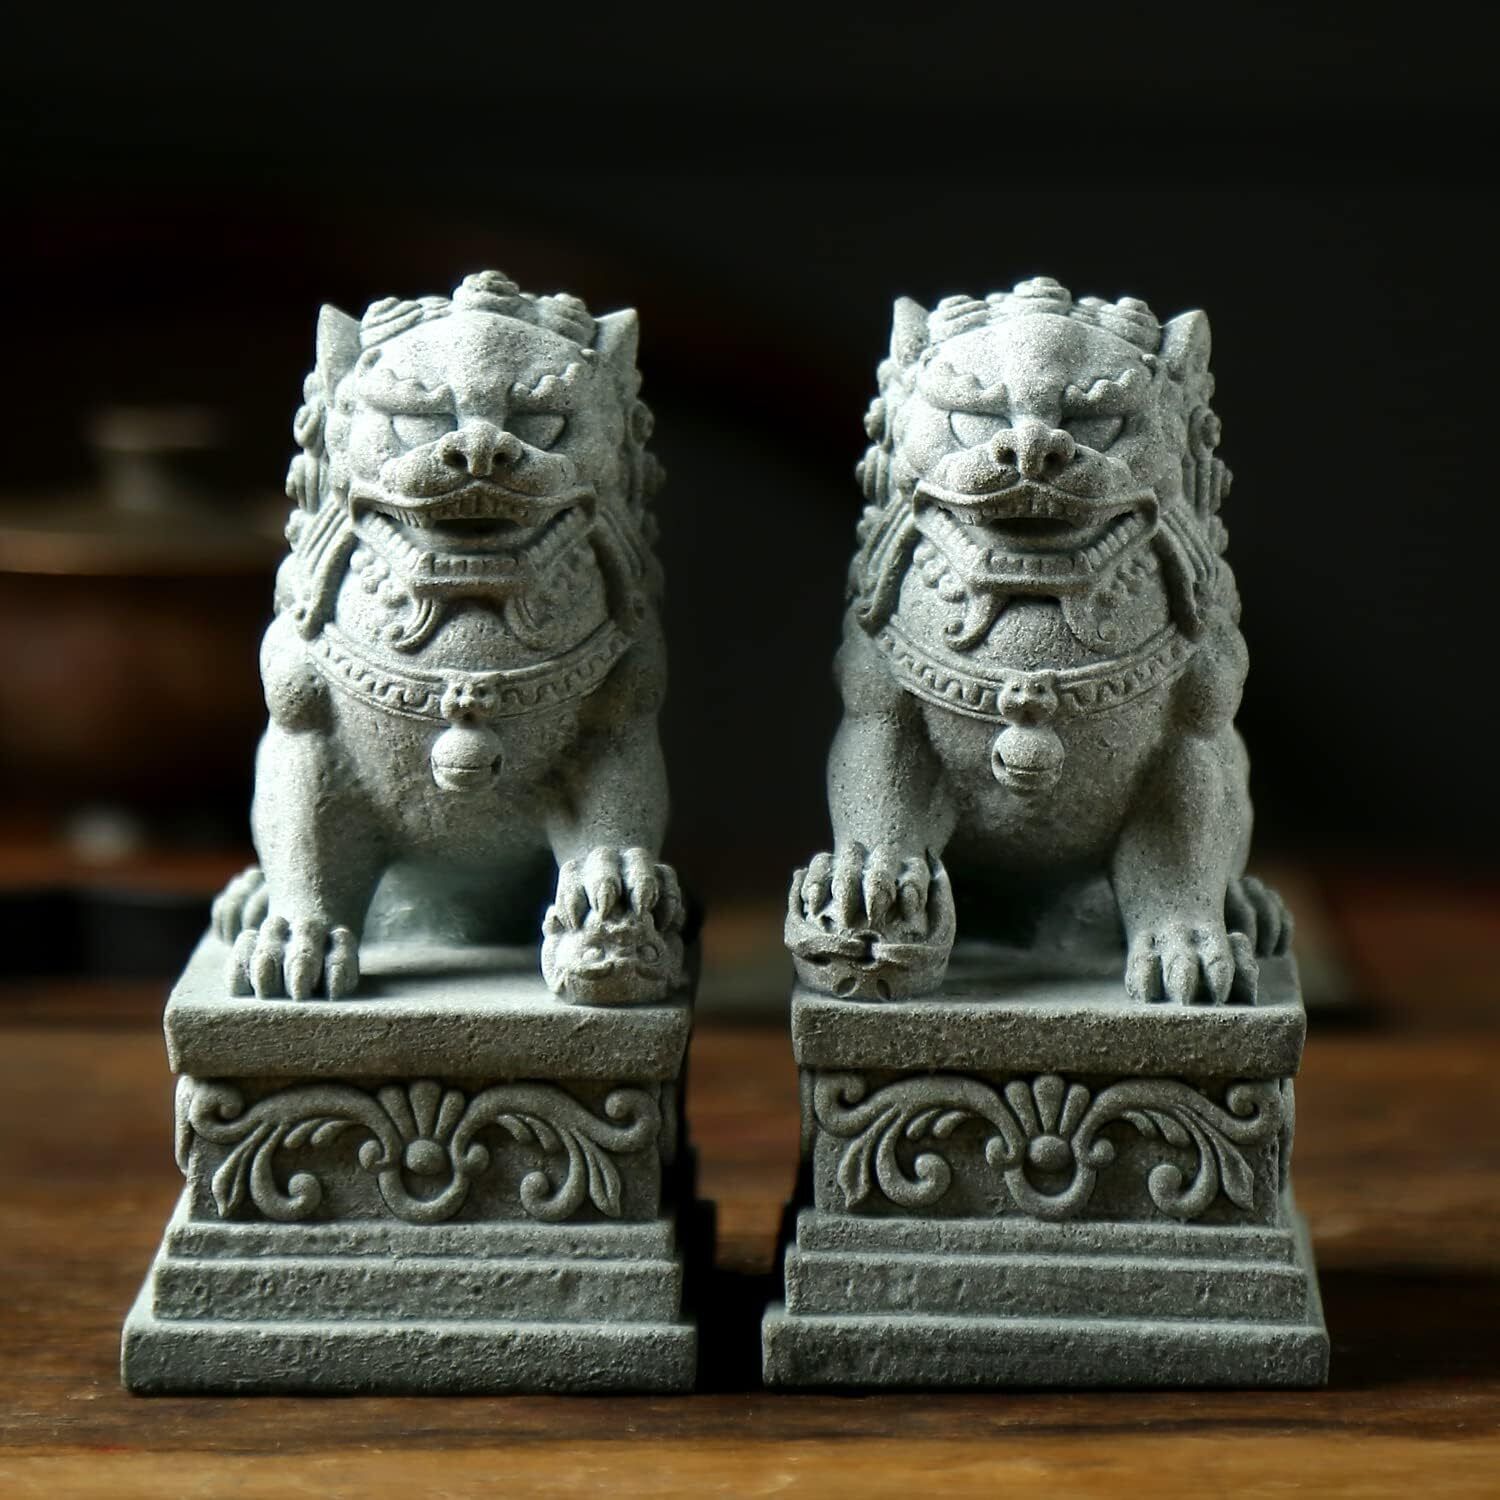 Pair of Authentic Chinese Foo Dogs Guardian Lions - Perfect Stone Bookends